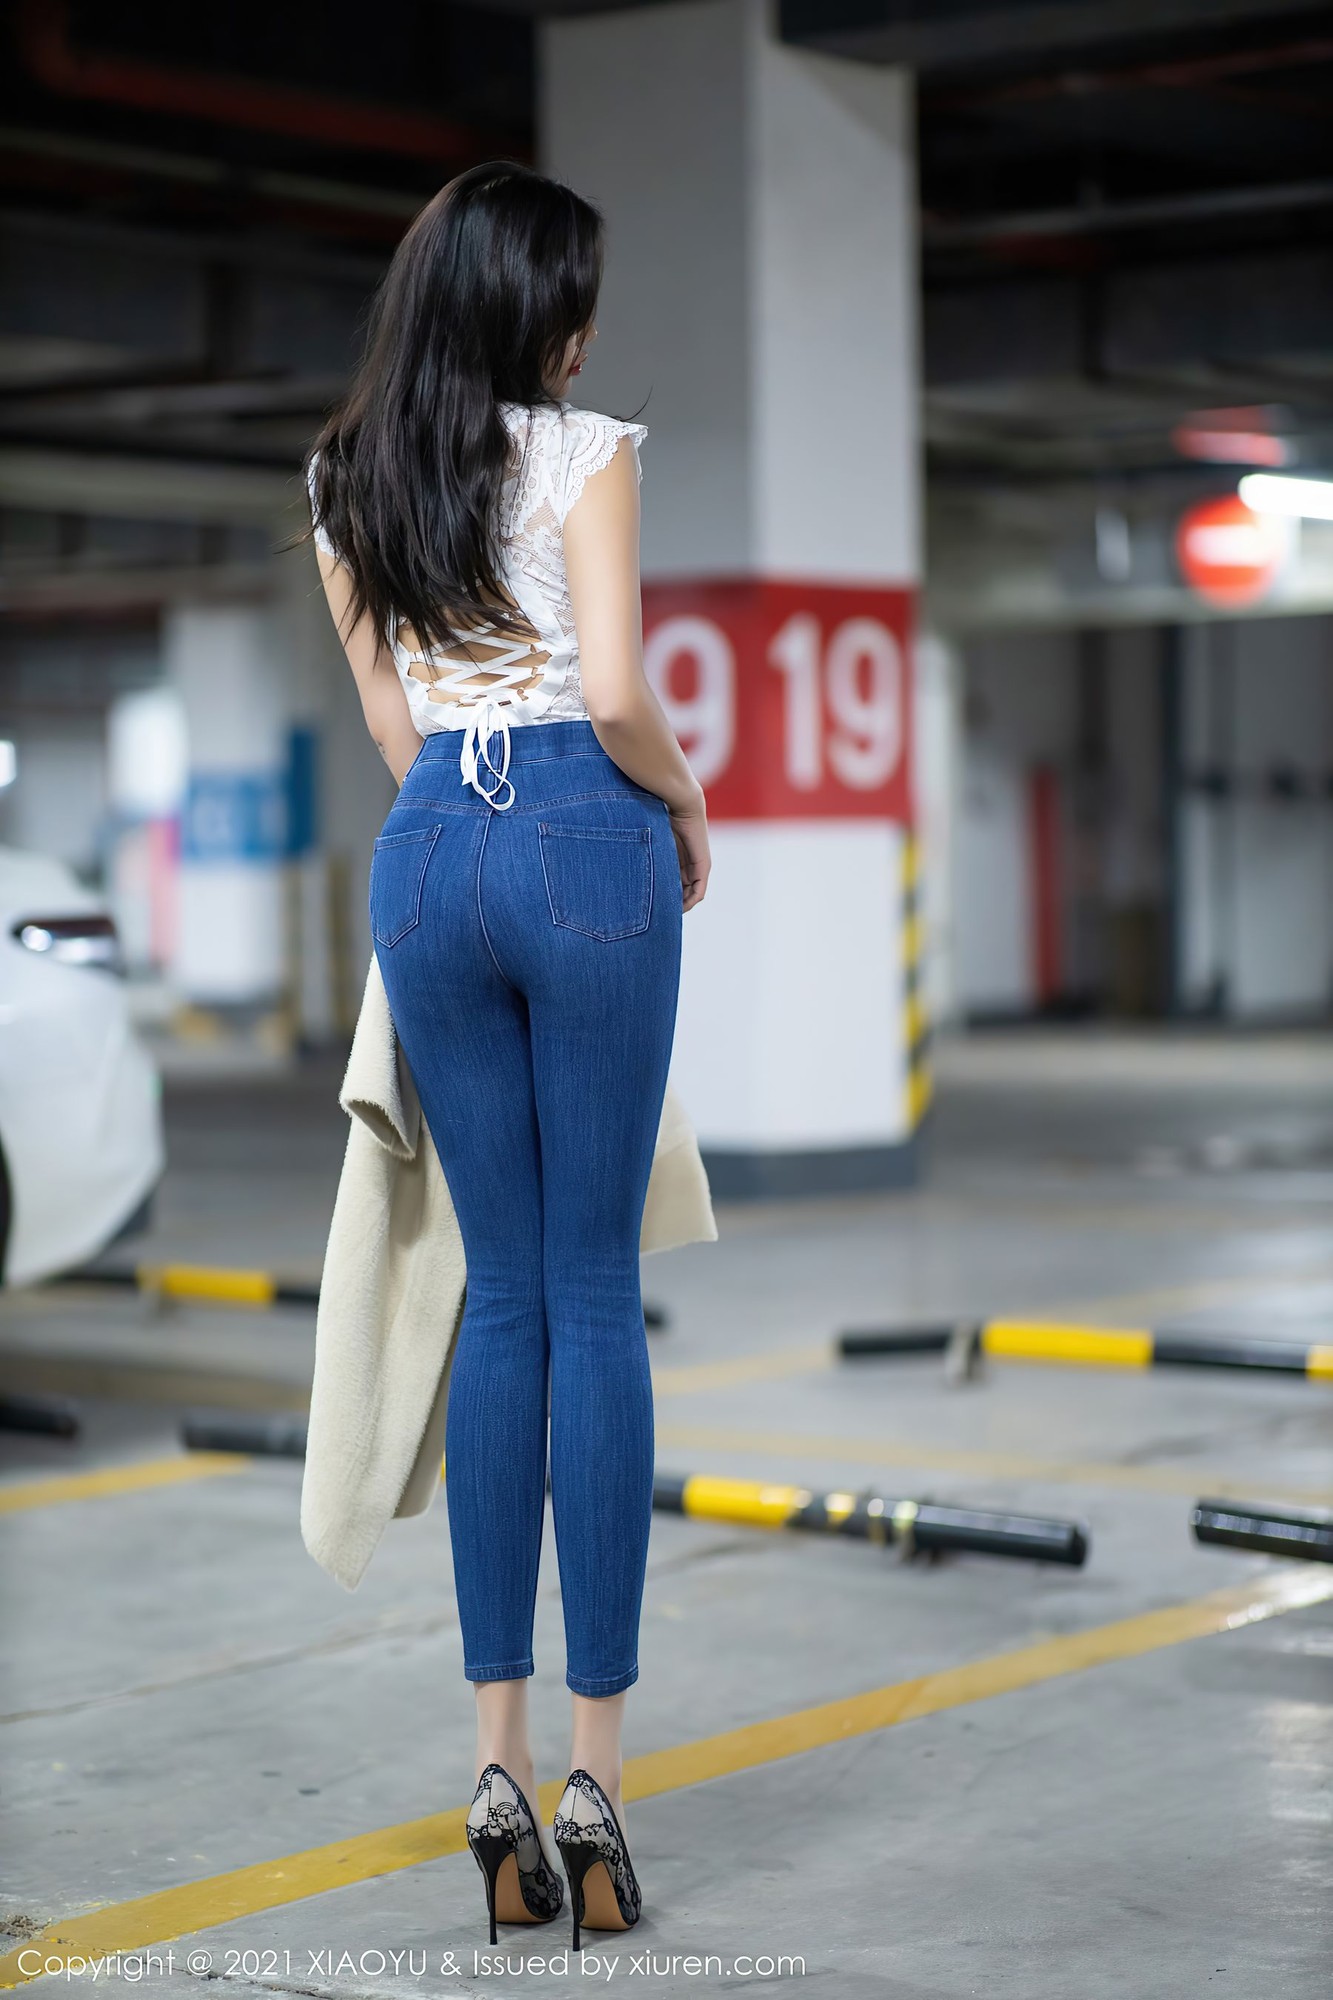 People 1333x2000 Chenchen Yang women Xiuren Asian ass Chinese model dark hair women indoors parking lot urban high heels jeans brunette long hair Yang Chen Chinese Chinese women legs standing arched back lace white lace white tops black hair rear view back tight jeans